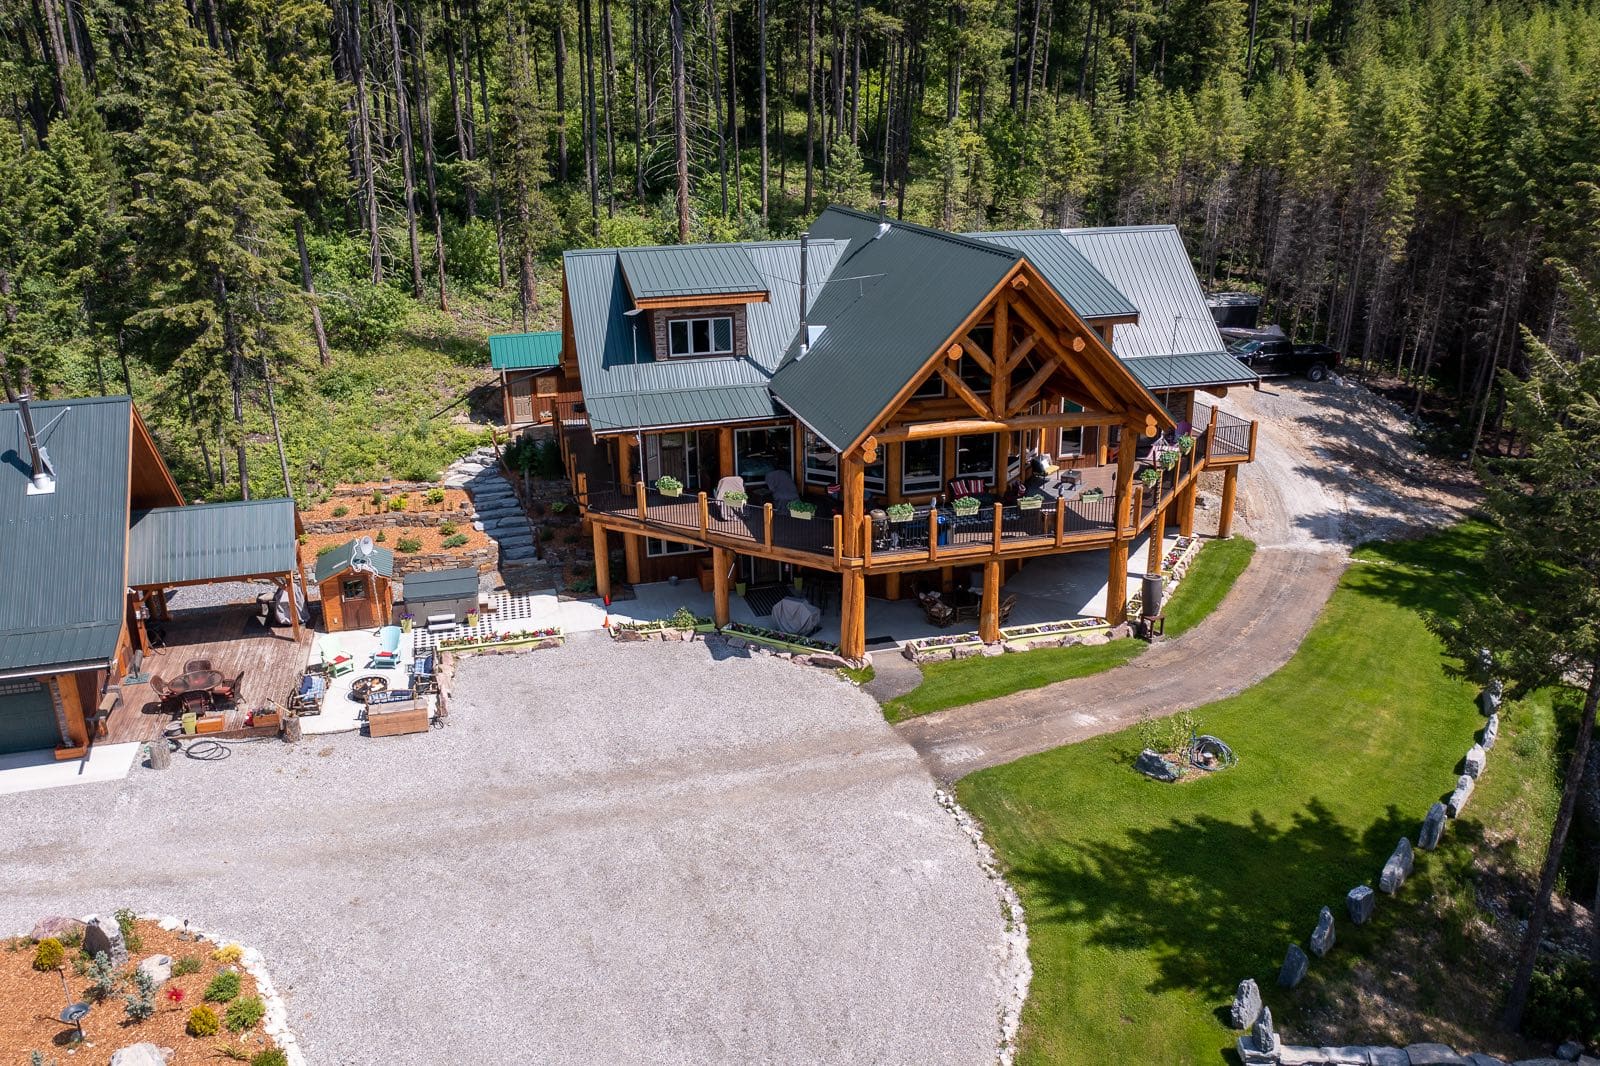 BC Log Home Builders post and beam log home.